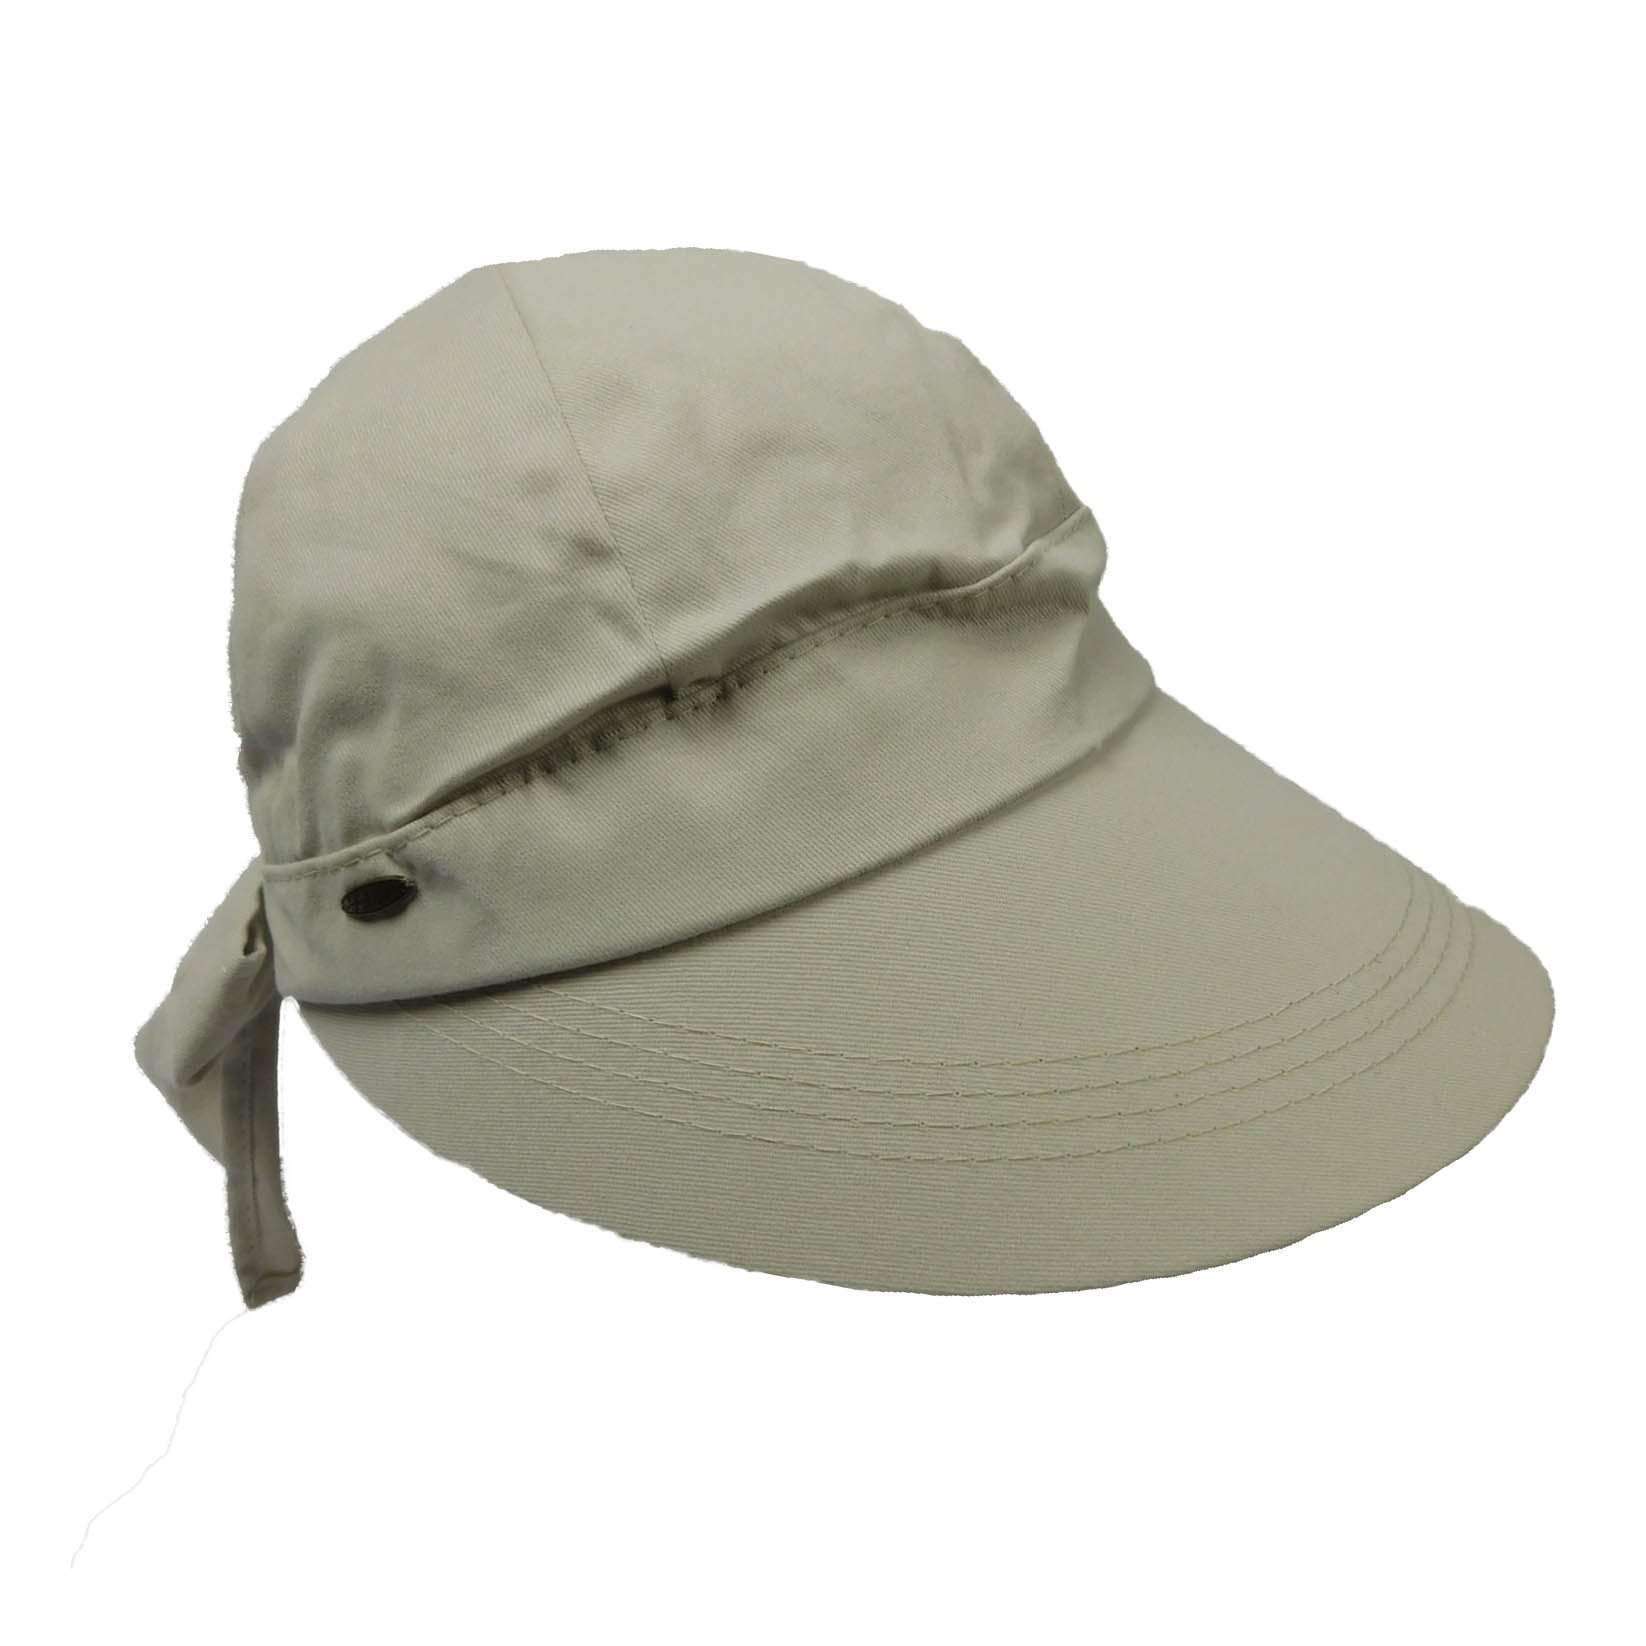 Cotton Facesaver Cap with Bow - Cappelli Hats Cap Cappelli Straworld L70SW-PT Putty OS (57 cm) 